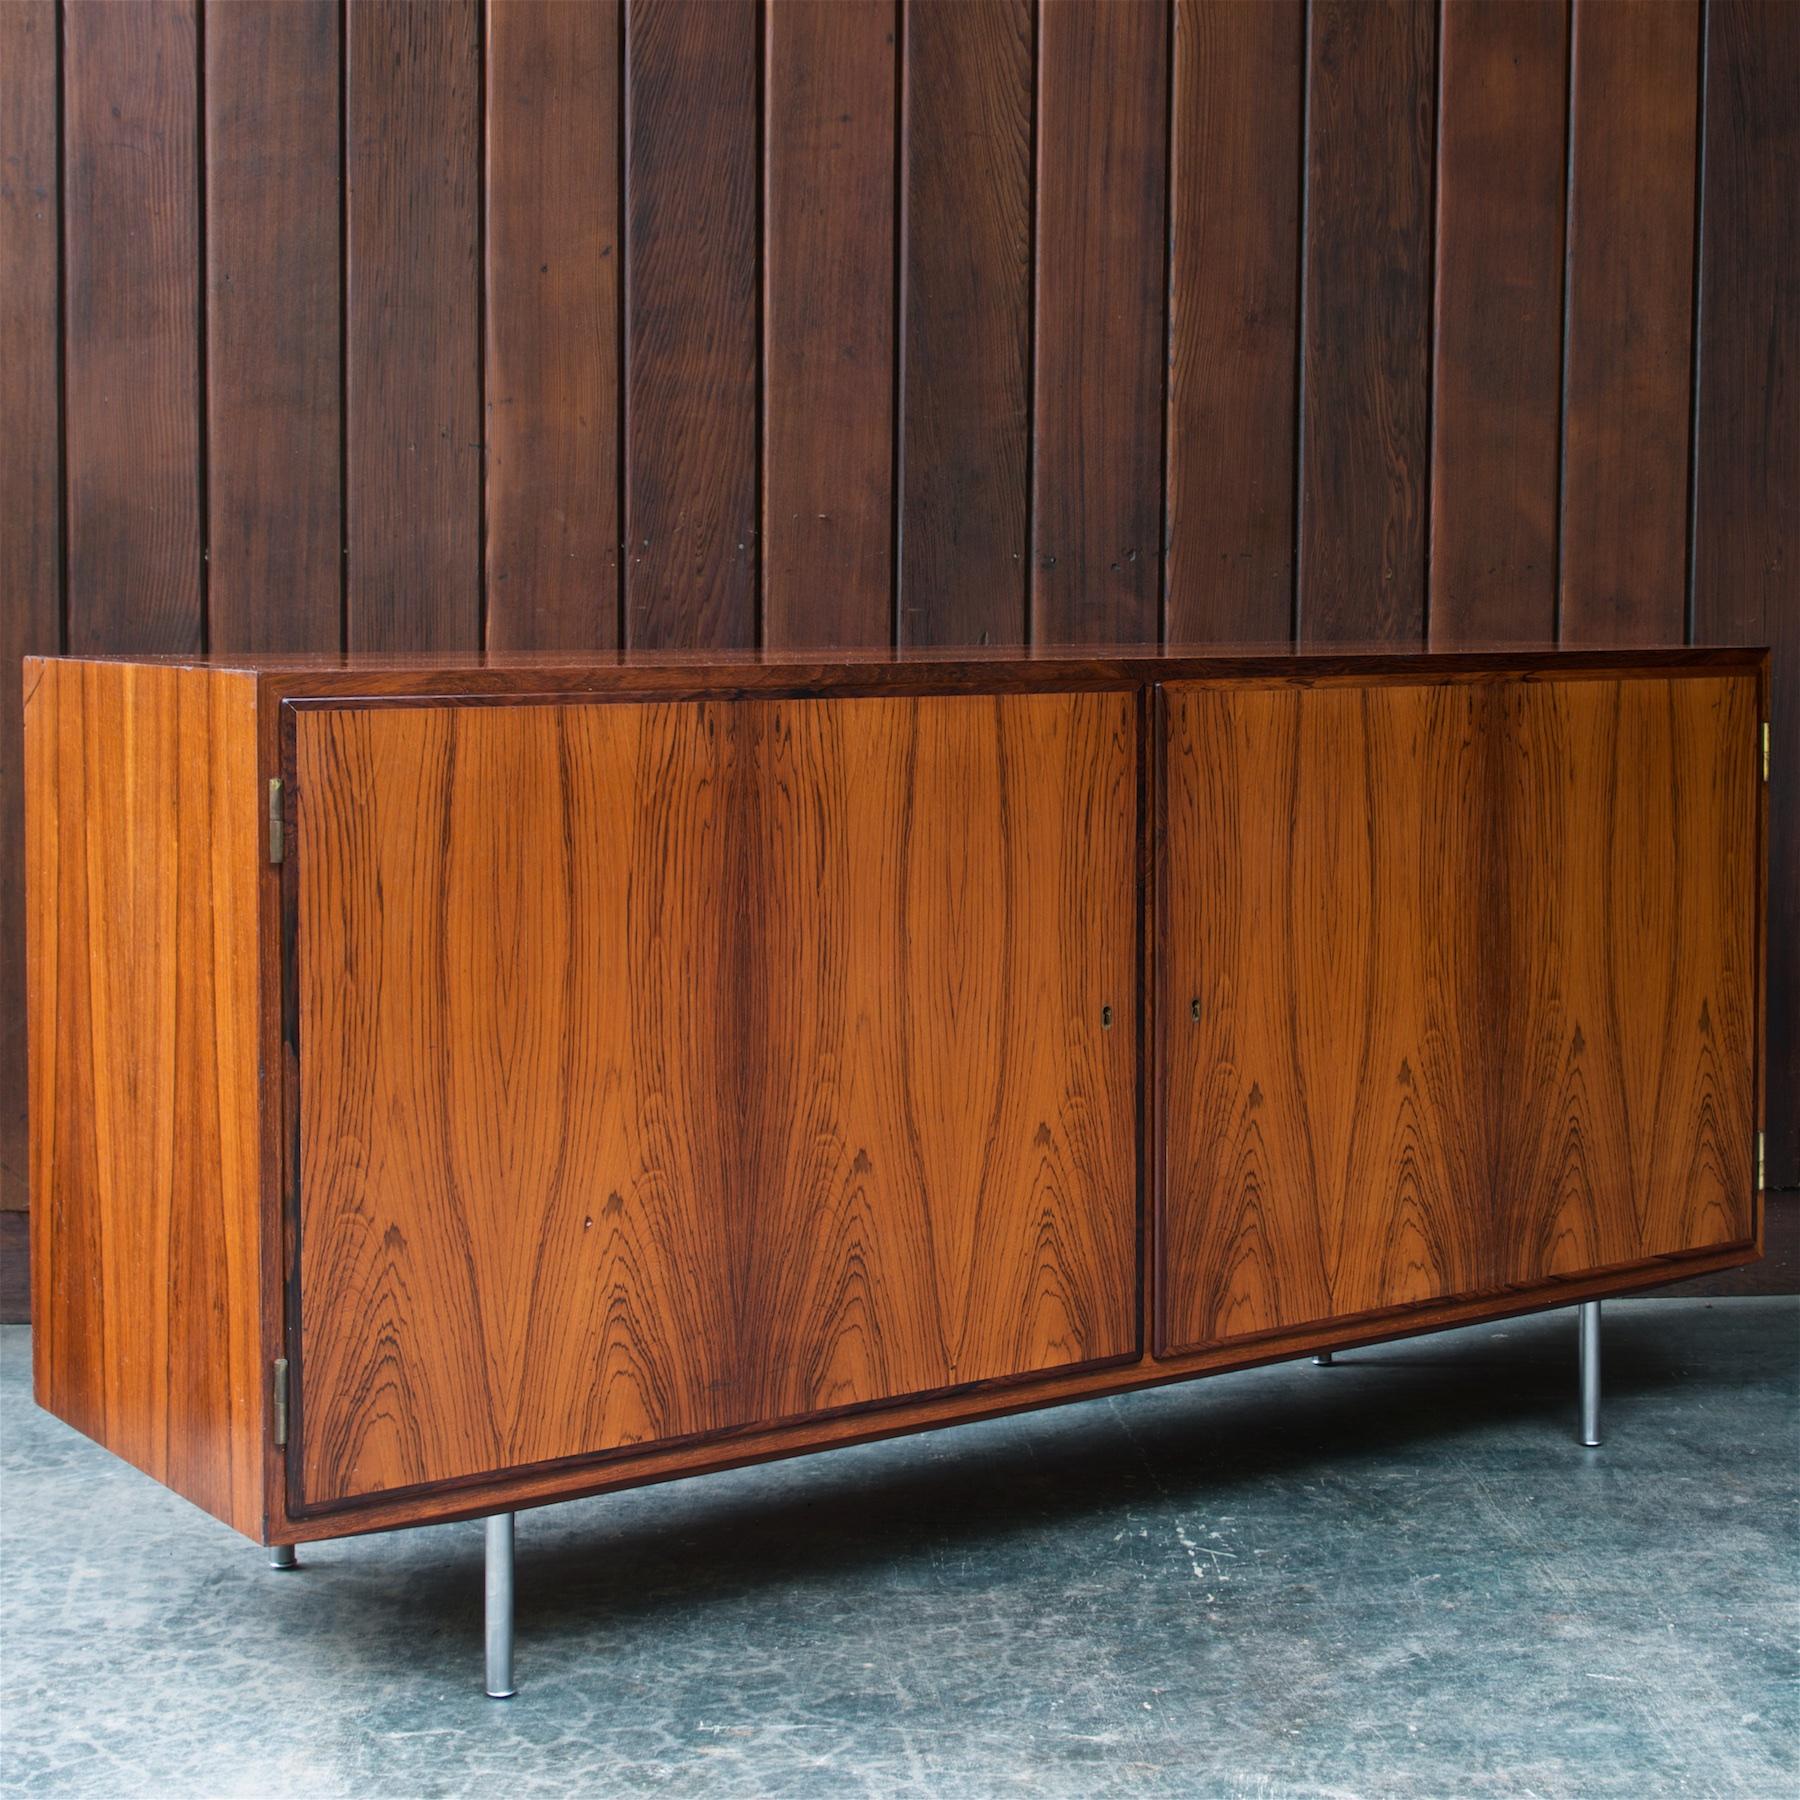 Lacquered 1960s Danish Credenza Midcentury Hundevad Rosewood Rustic Cabinmodern